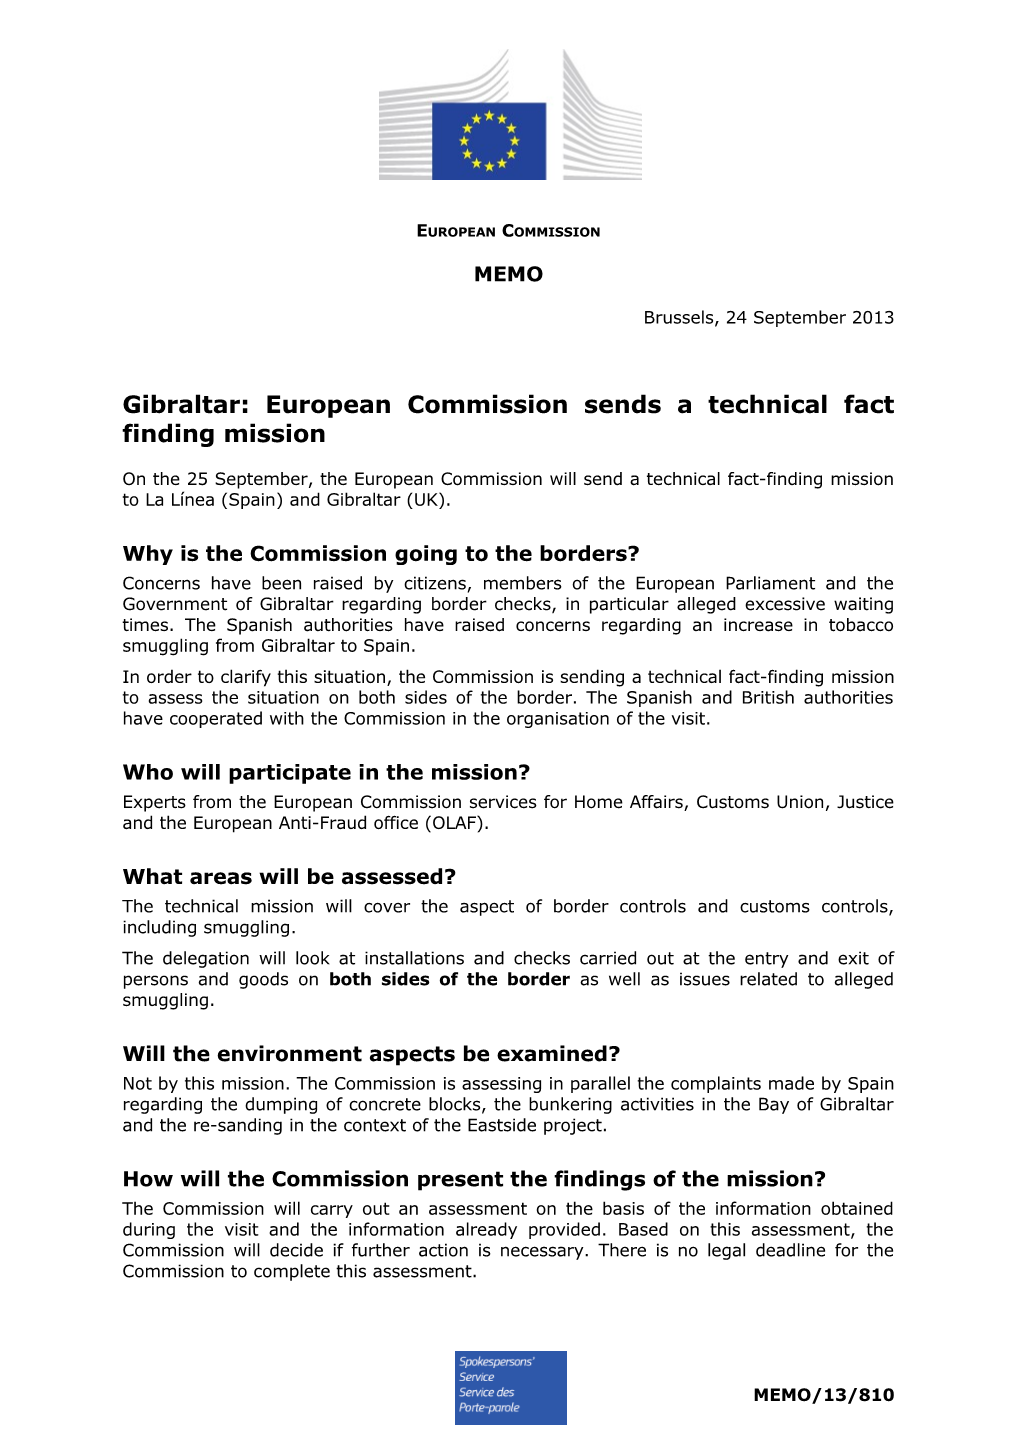 Gibraltar: European Commission Sends a Technical Fact Finding Mission